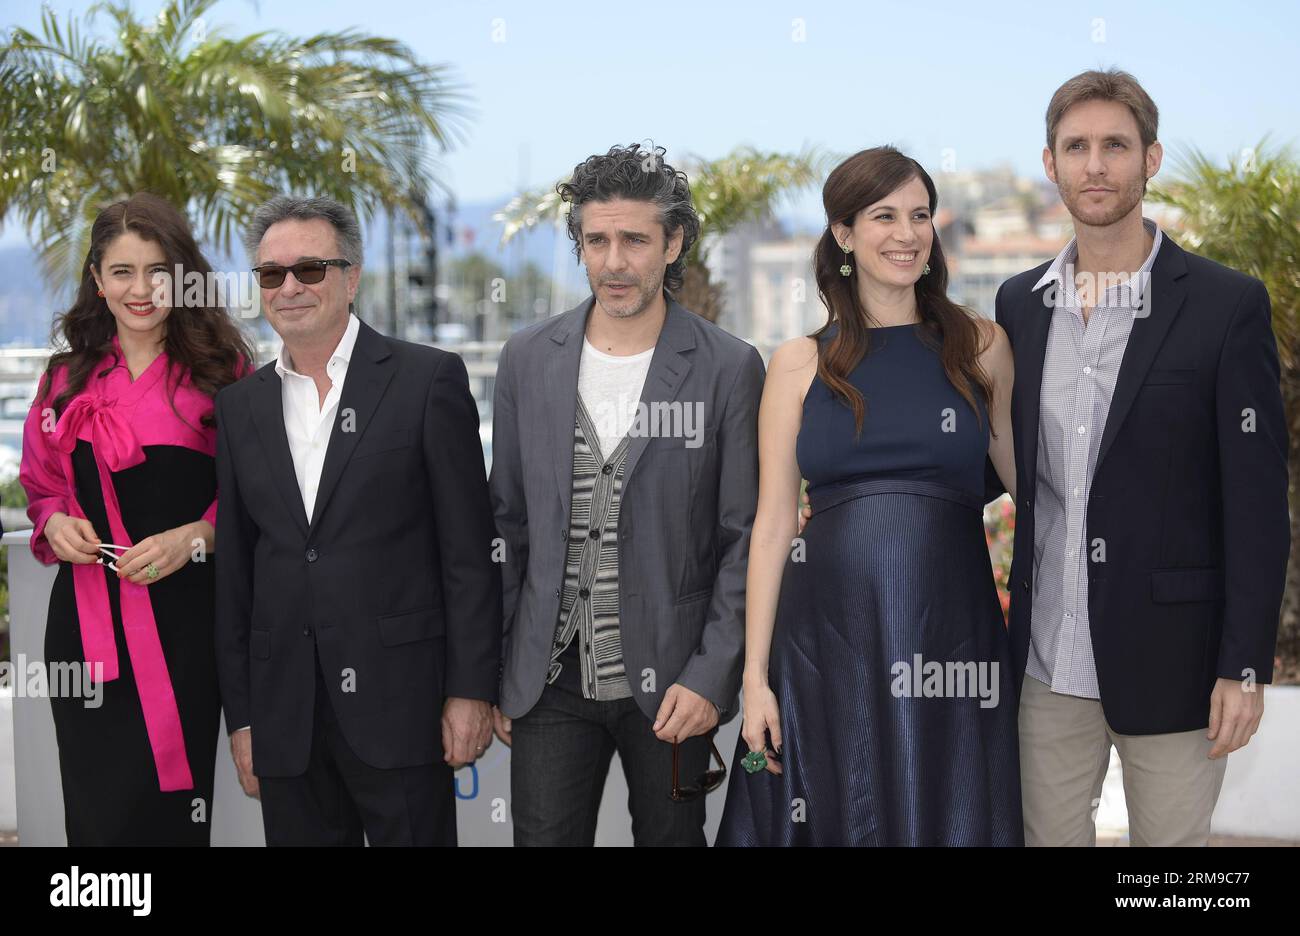 (140517) -- CANNES, May 17, 2014 (Xinhua) -- Argentine actress Erica Rivas, Actor Oscar Martinez, Argentine actor Leonardo Sbaraglia, Argentine actress Maria Marull and Argentine director Damian Szifron (from L to R) pose during the photocall for Relatos Salvajes (Wild Tales) during the 67th Cannes Film Festival in Cannes, France, May 17, 2014. The movie is presented in the Official Competition of the festival which runs from 14 to 25 May. (Xinhua/Ye Pingfan) FRANCE-CANNES-FILM FESTIVAL-WILD TALES-PHOTO CALL PUBLICATIONxNOTxINxCHN   Cannes May 17 2014 XINHUA Argentine actress Erica Rivas Actor Stock Photo